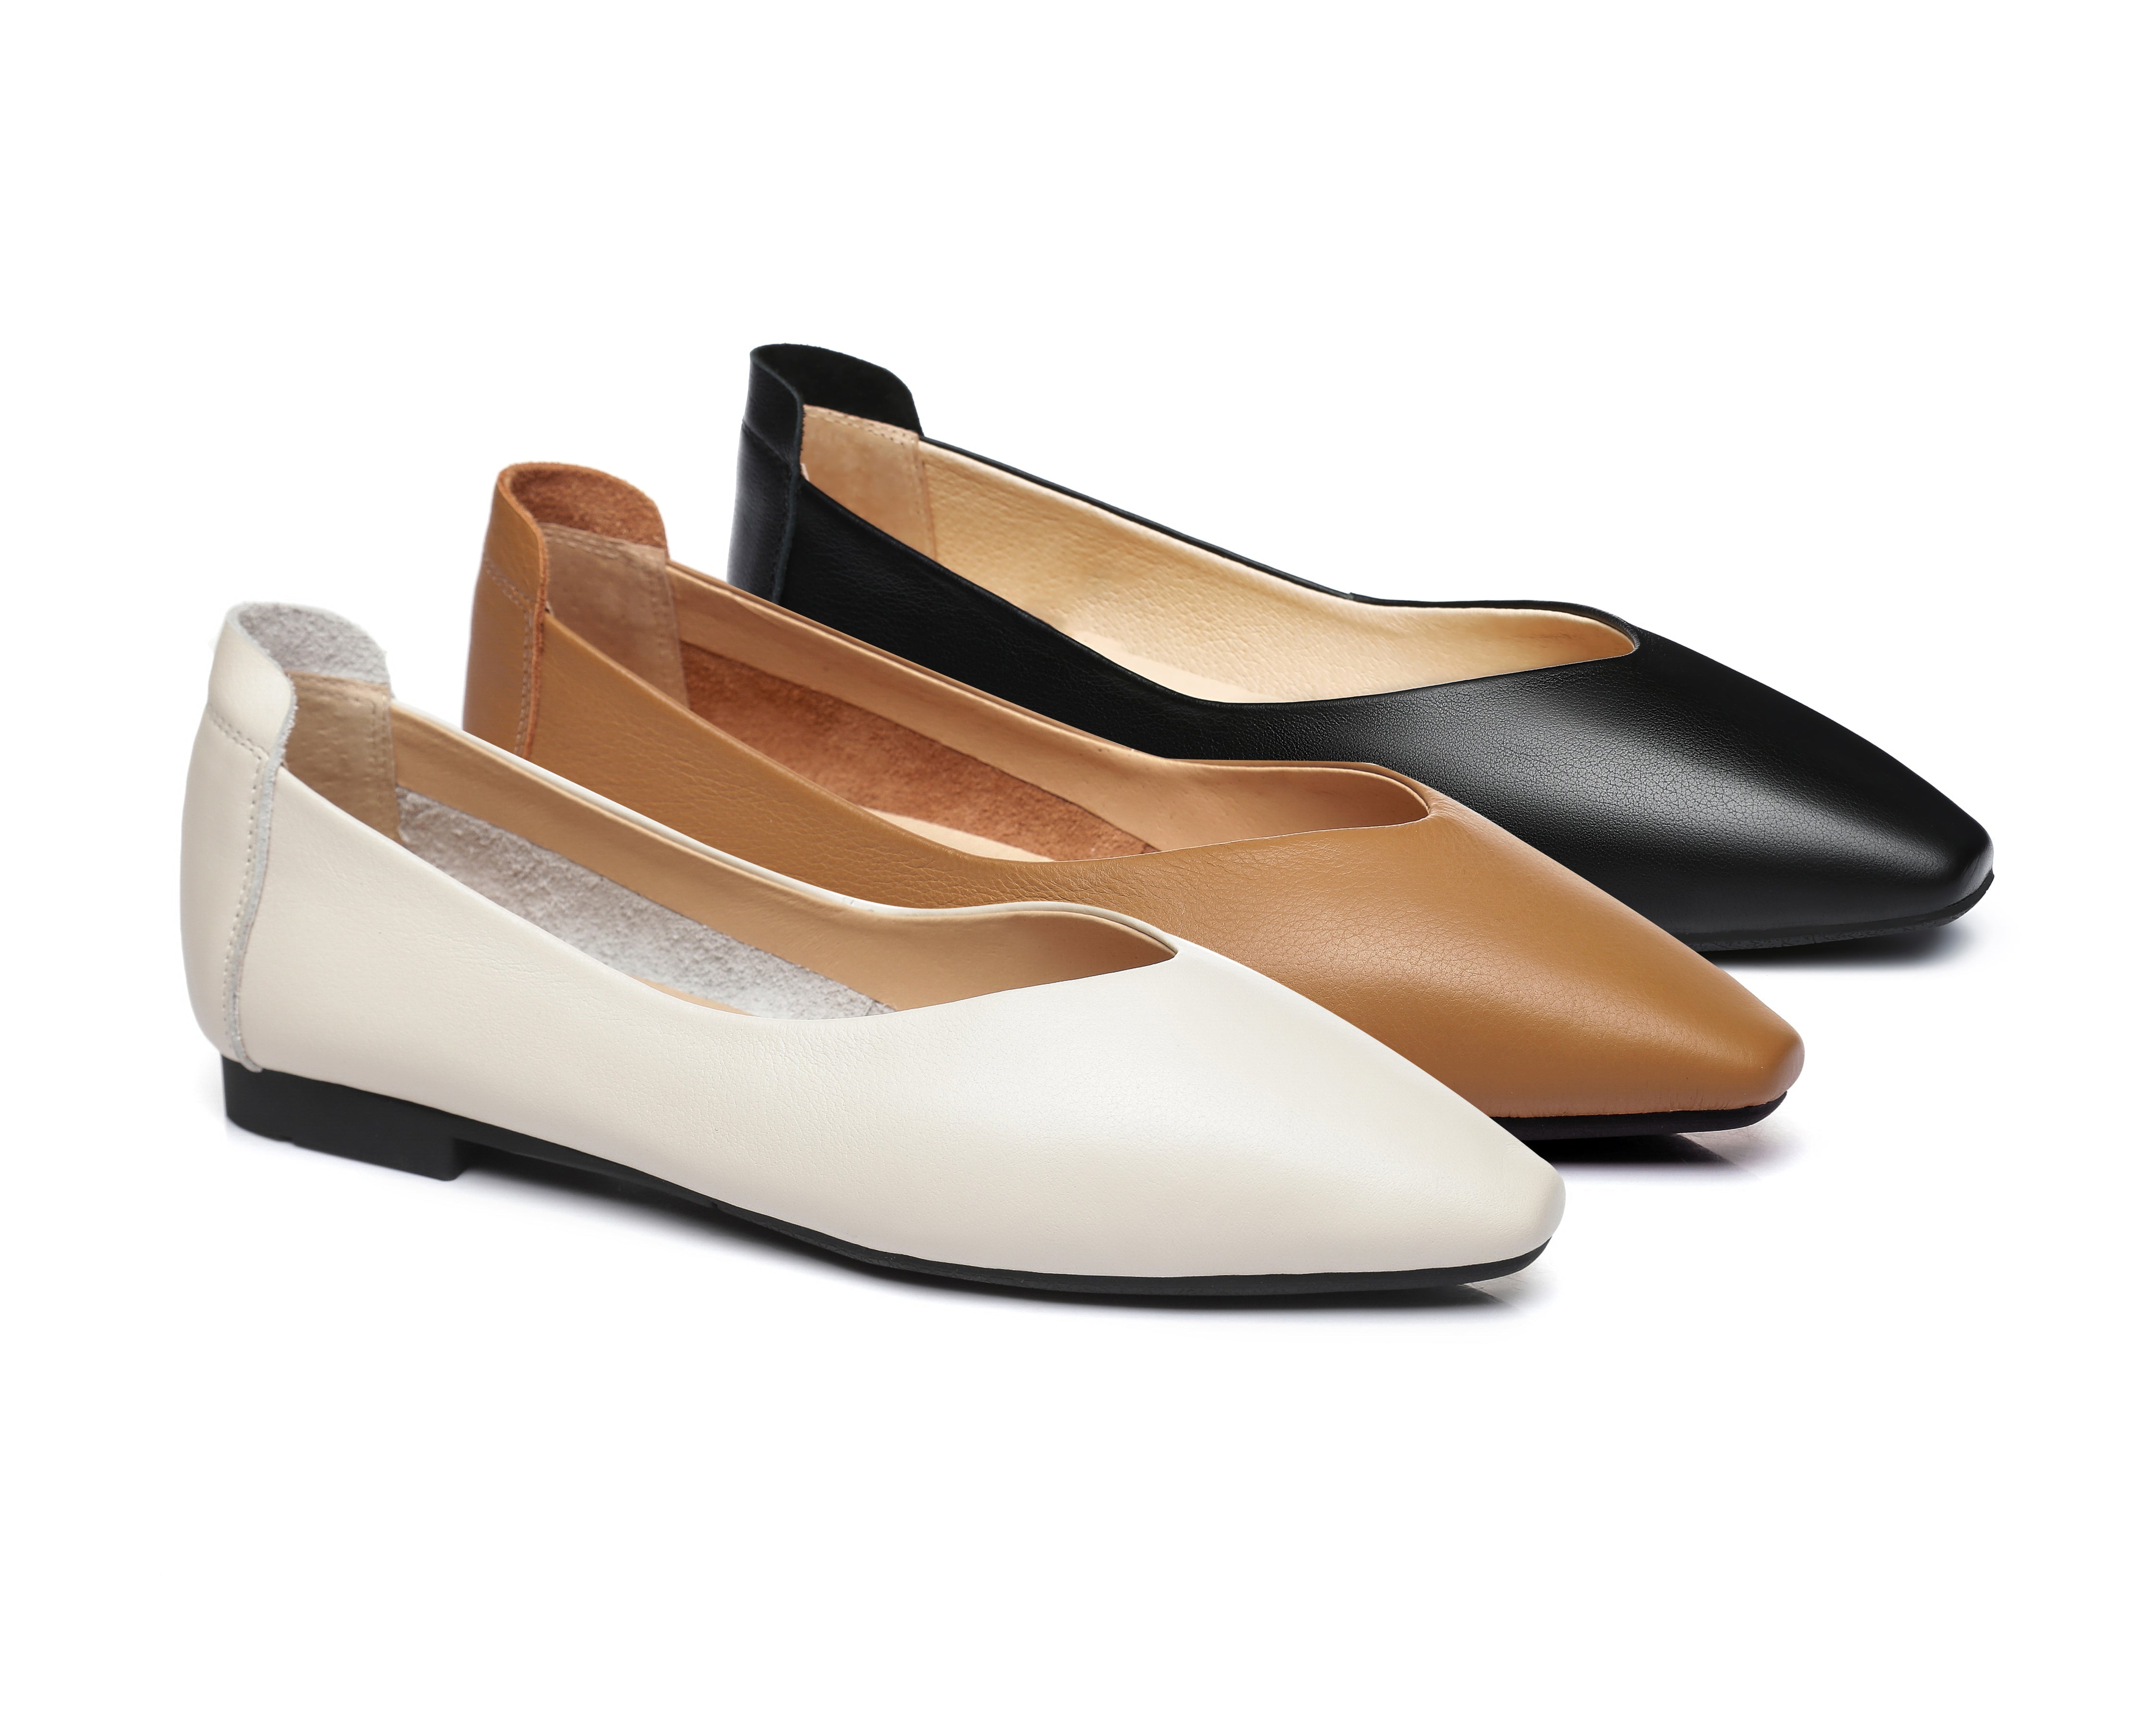 Flats - Everly Pointed Toe Ballet Leather Flats